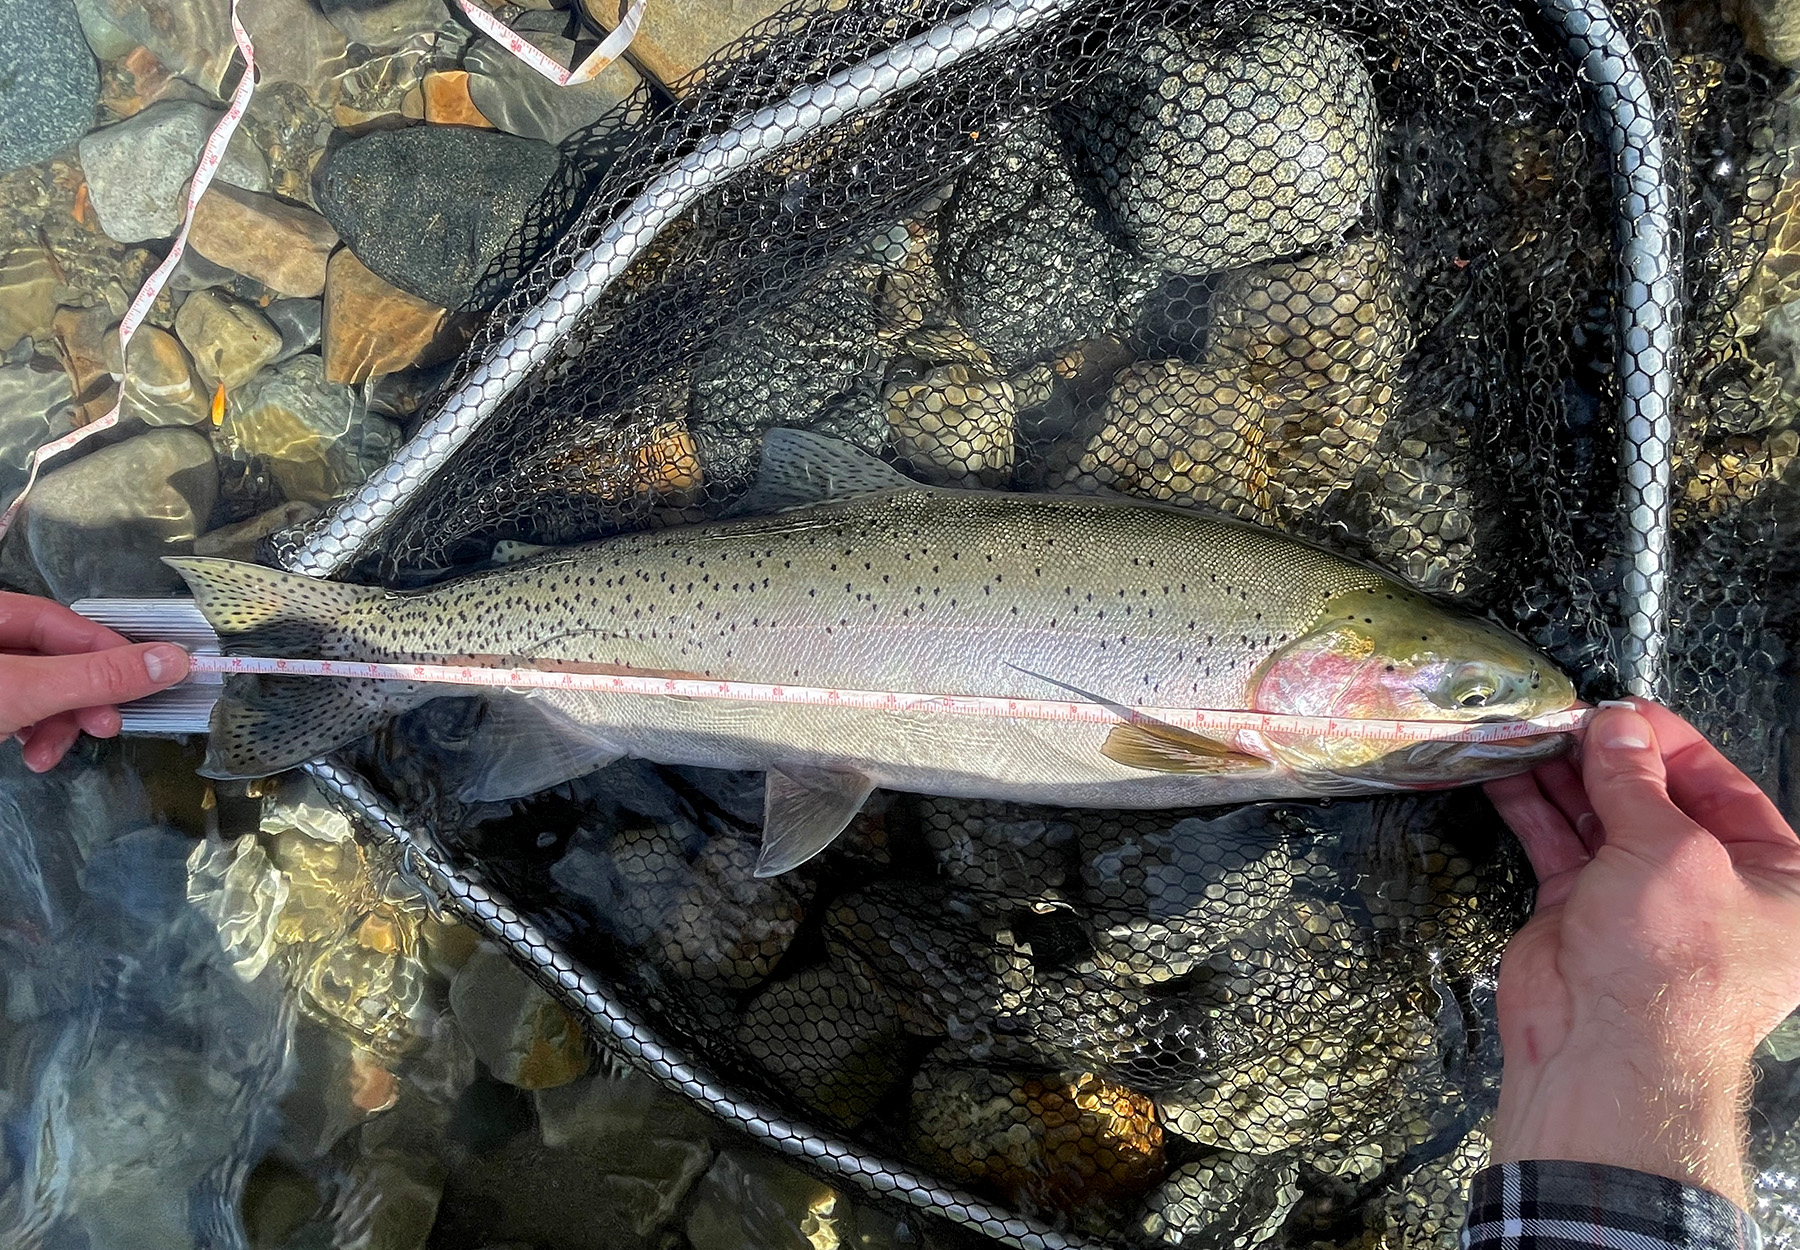 A westslope cutthroat trout in a net.